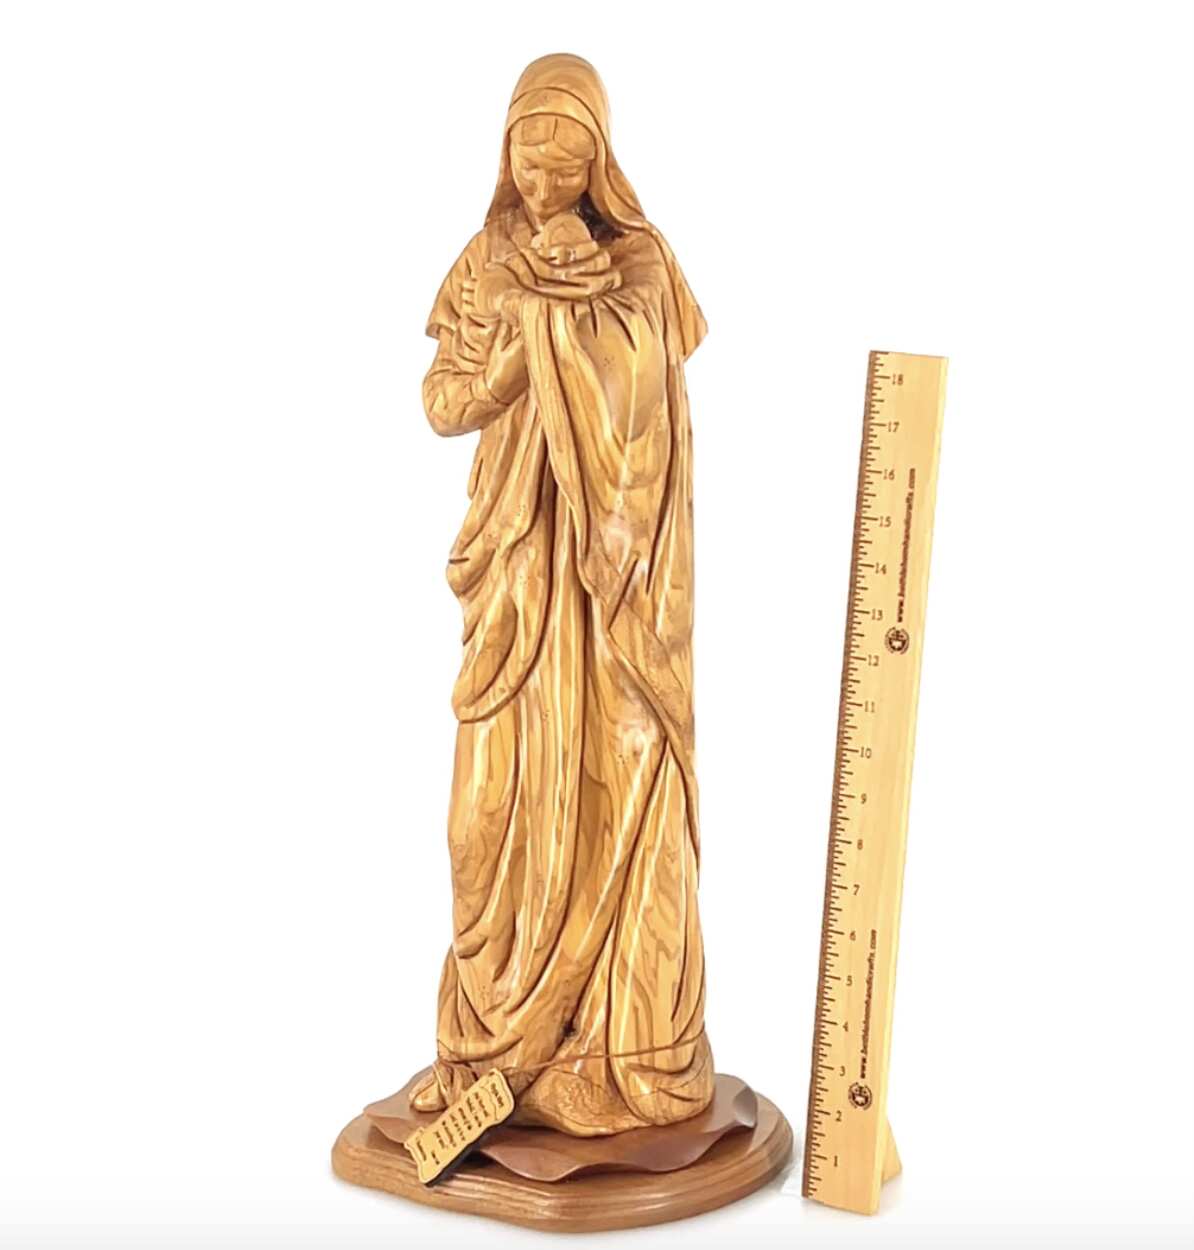 Virgin Mary The Mother of Mercy with Her Son Jesus Christ Masterpiece, 24.8" Olive Wood Carving Statue from Bethlehem